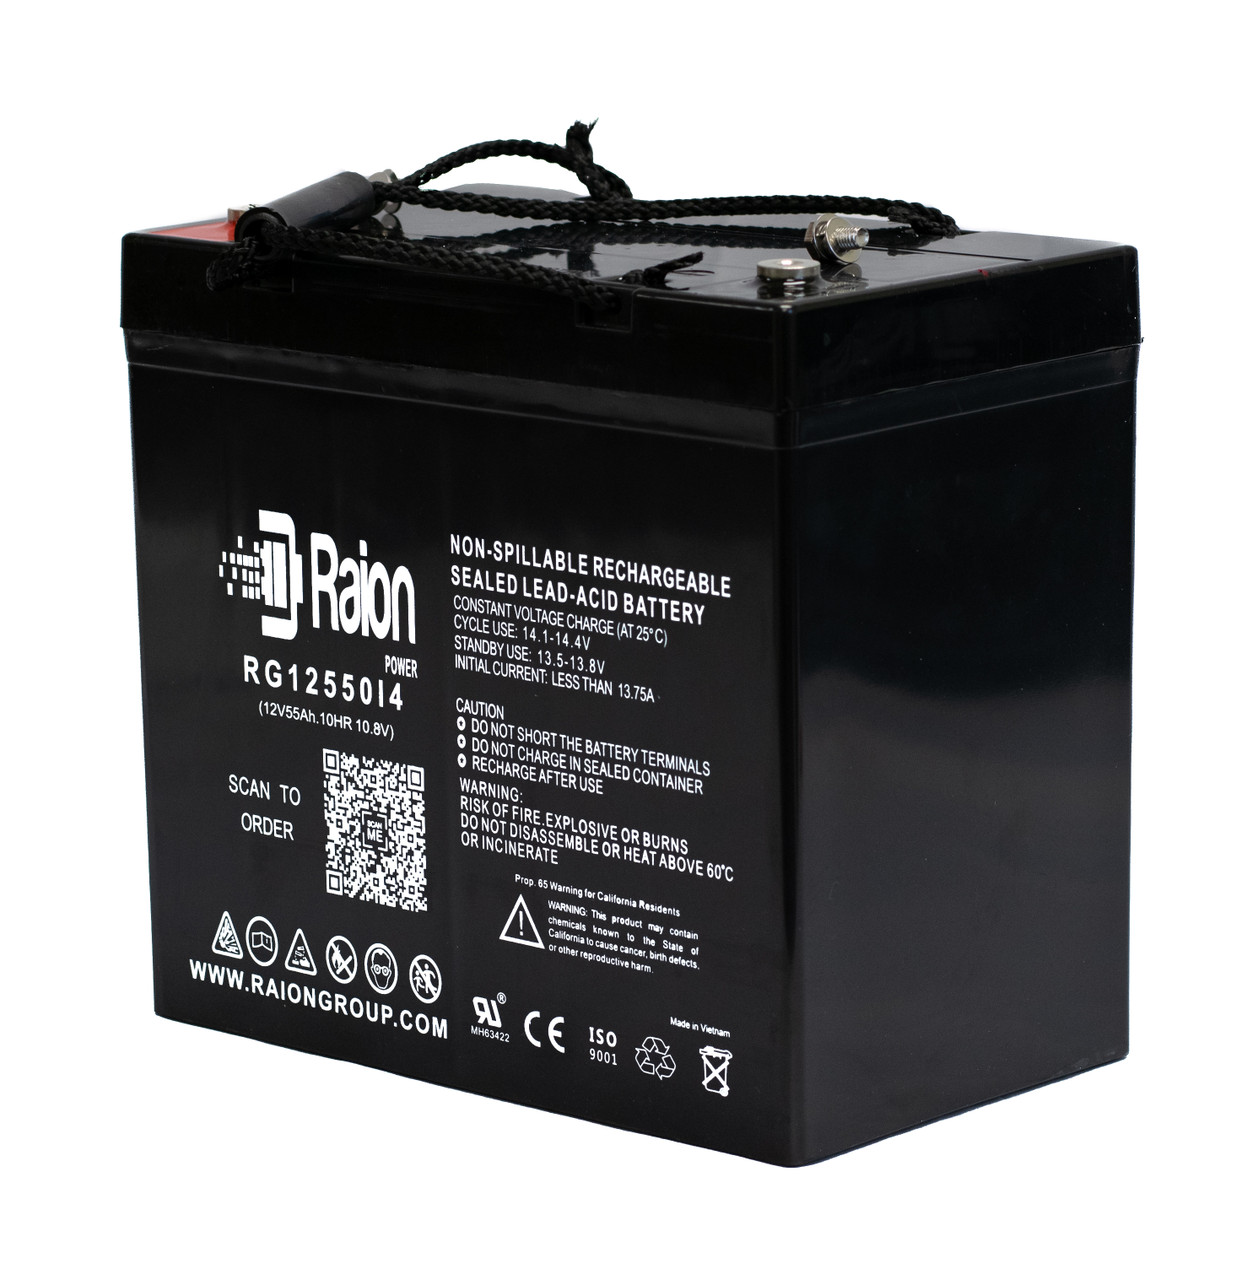 Raion Power 12V 55Ah 22NF Mobility Scooter Battery Replacement for Bruno PaceSaver ScoutRF